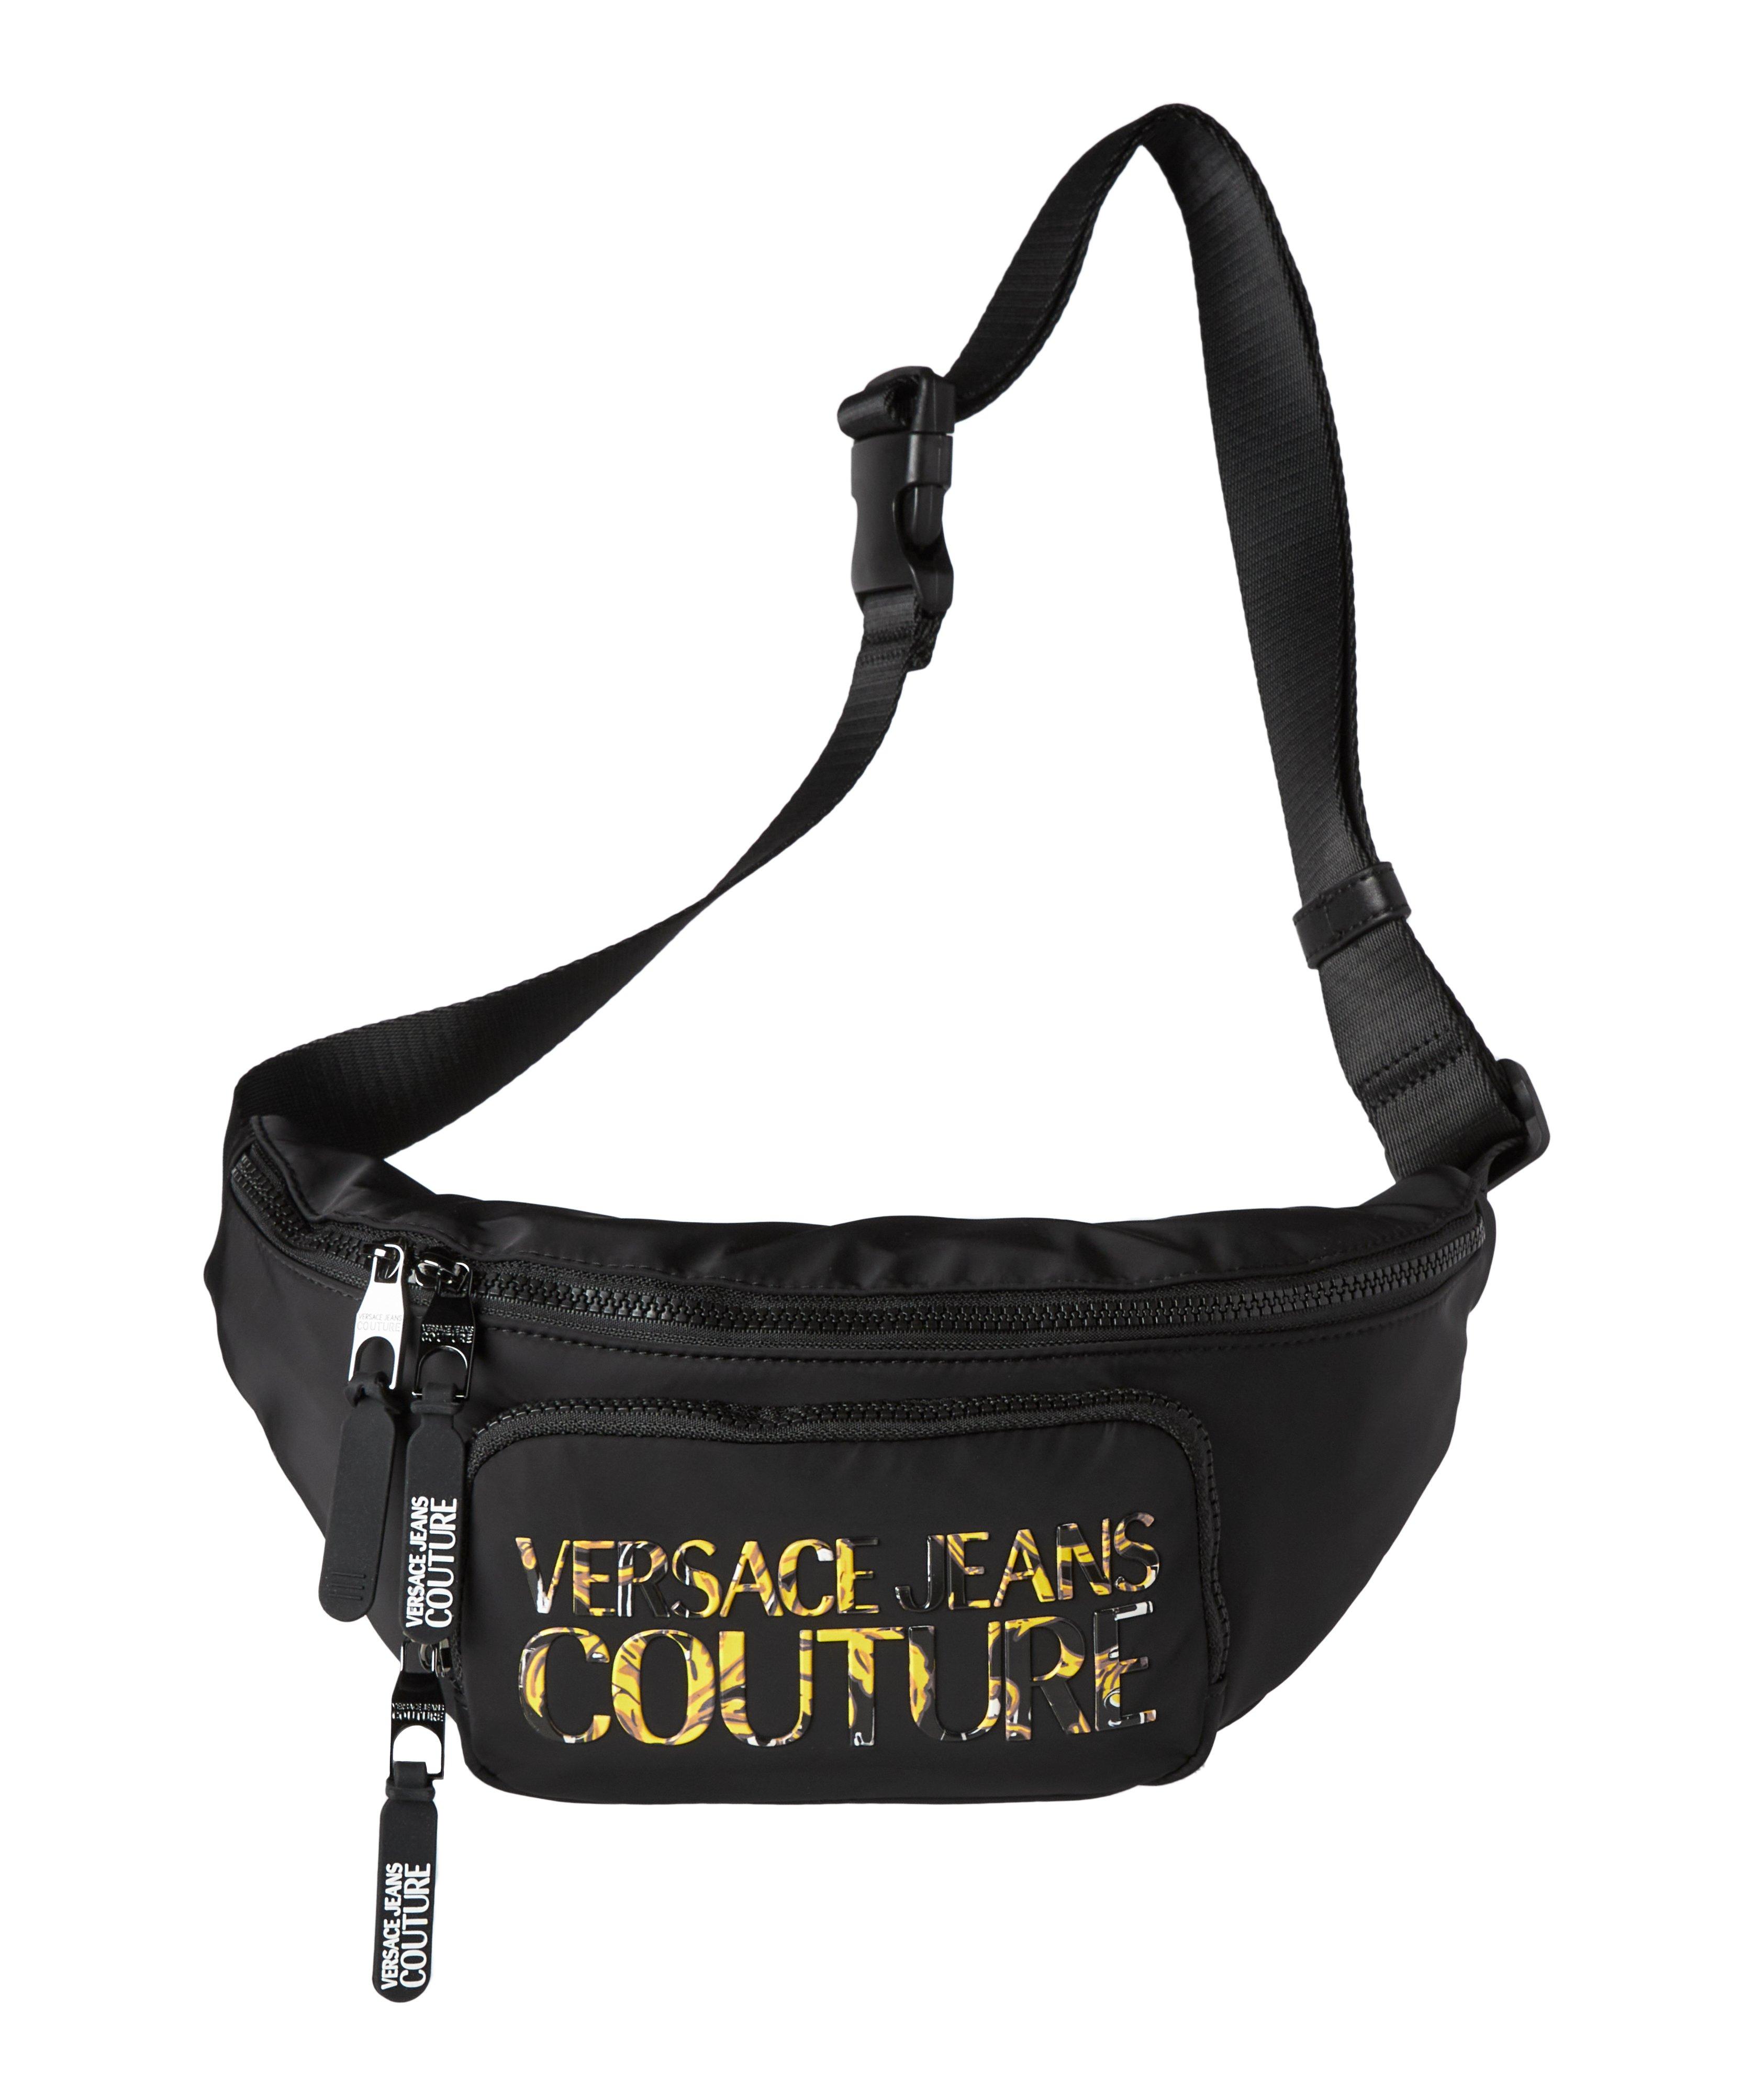 Iconic Logo Couture Technical Belt Bag image 0